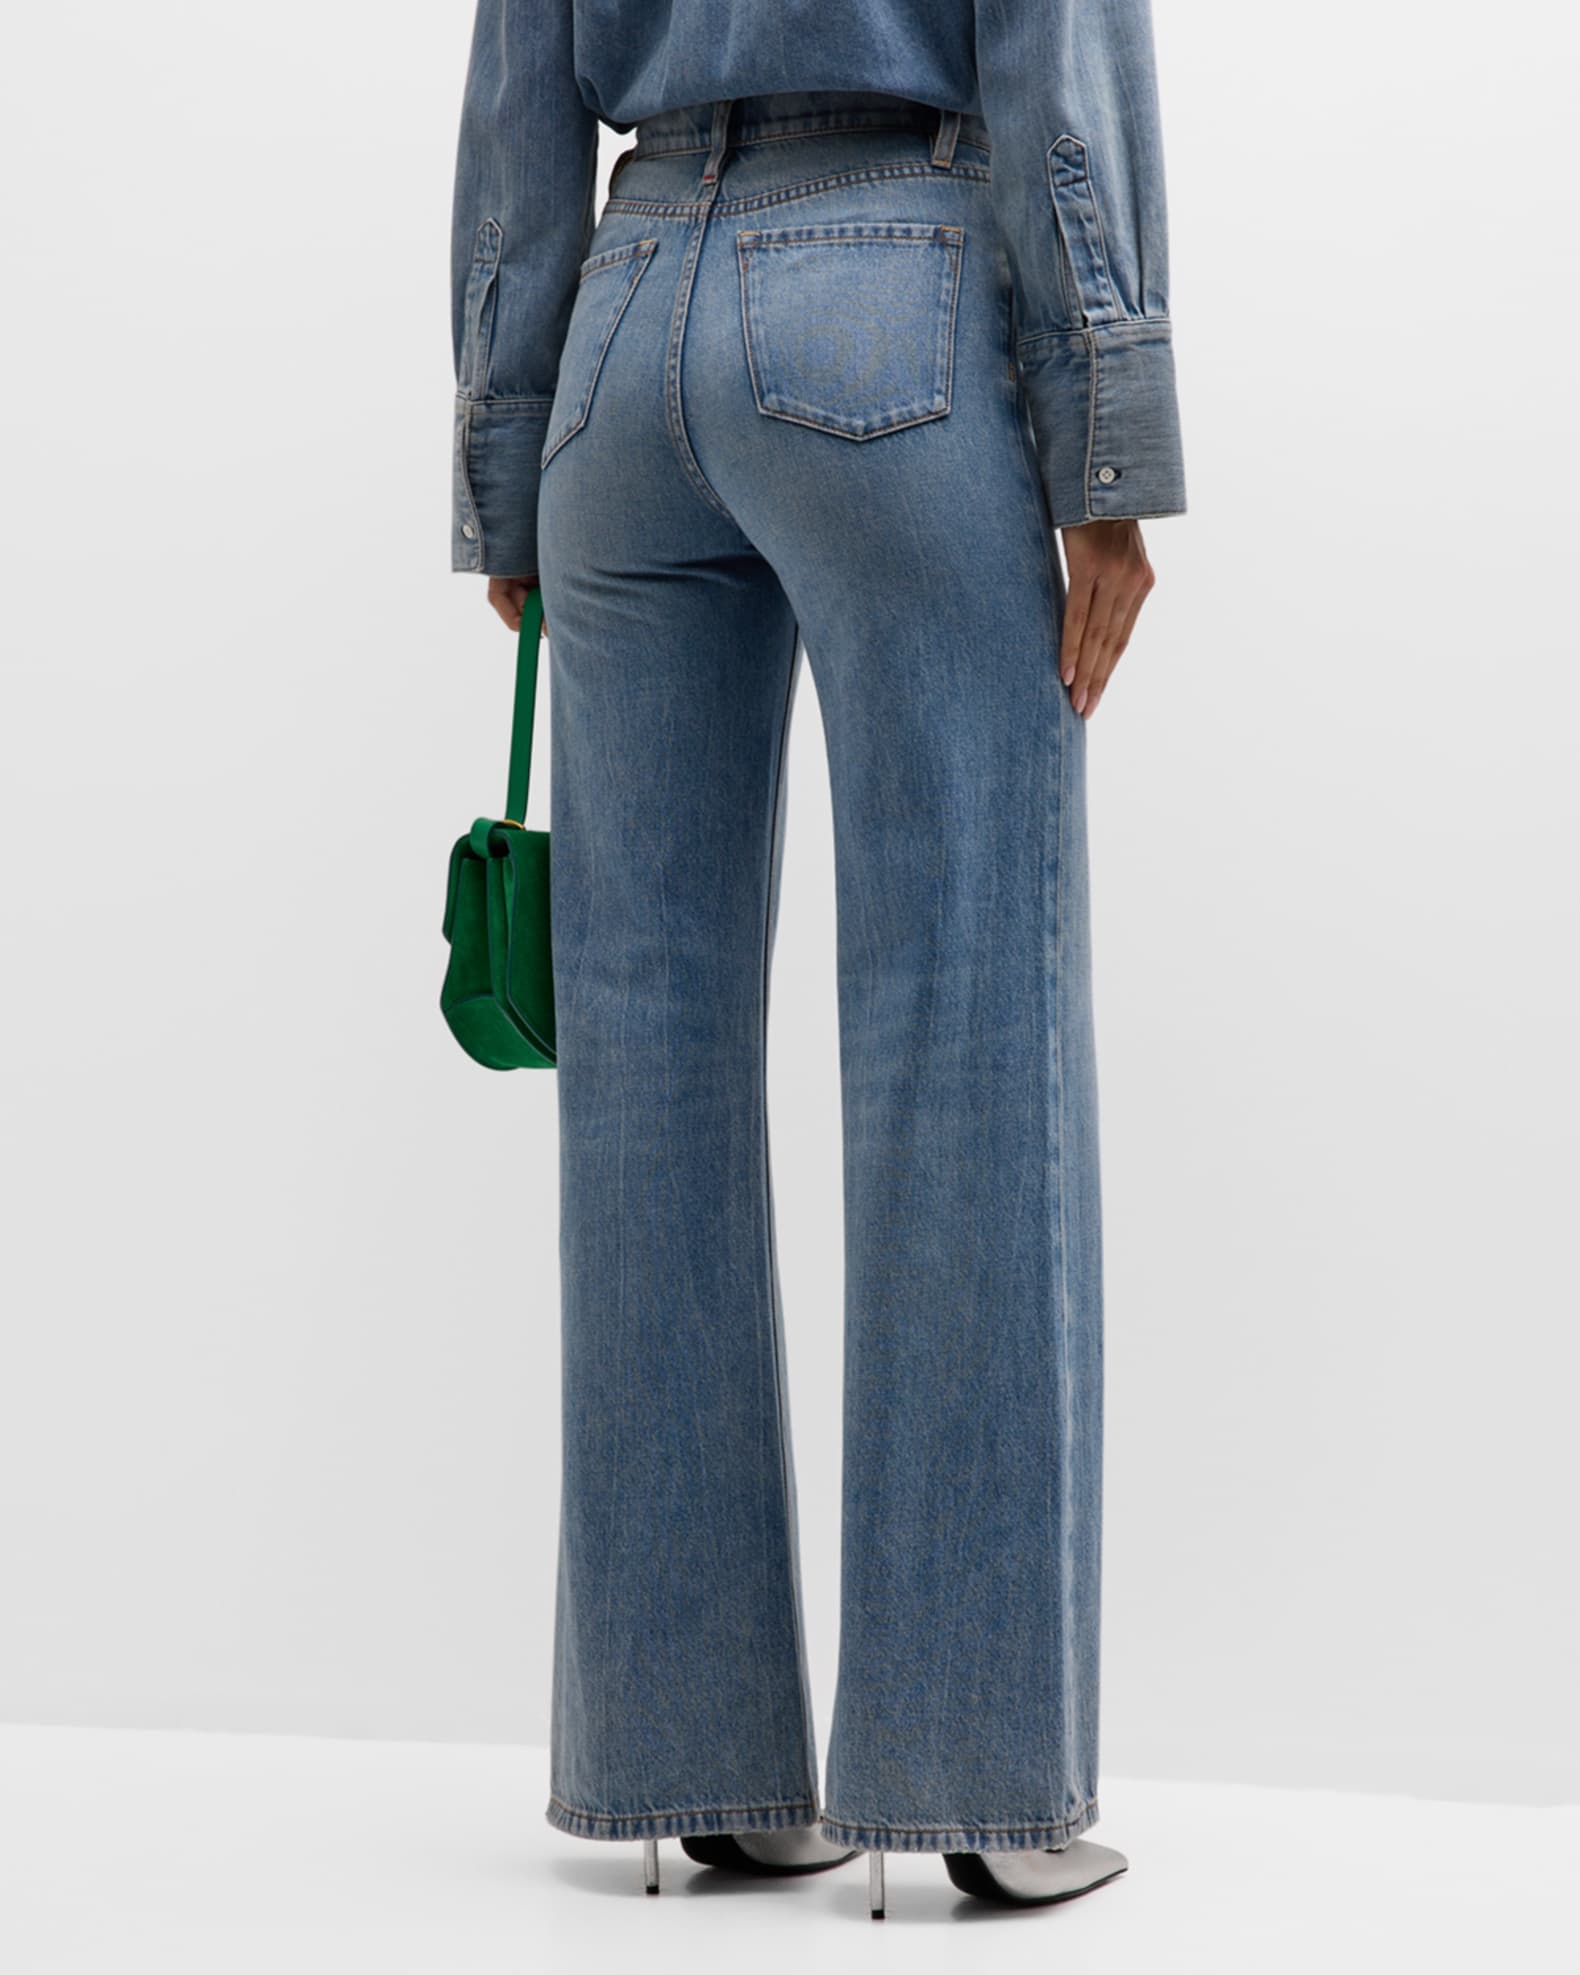 Alice + Olivia Weezy High-Rise Wide-Leg Jeans | Neiman Marcus